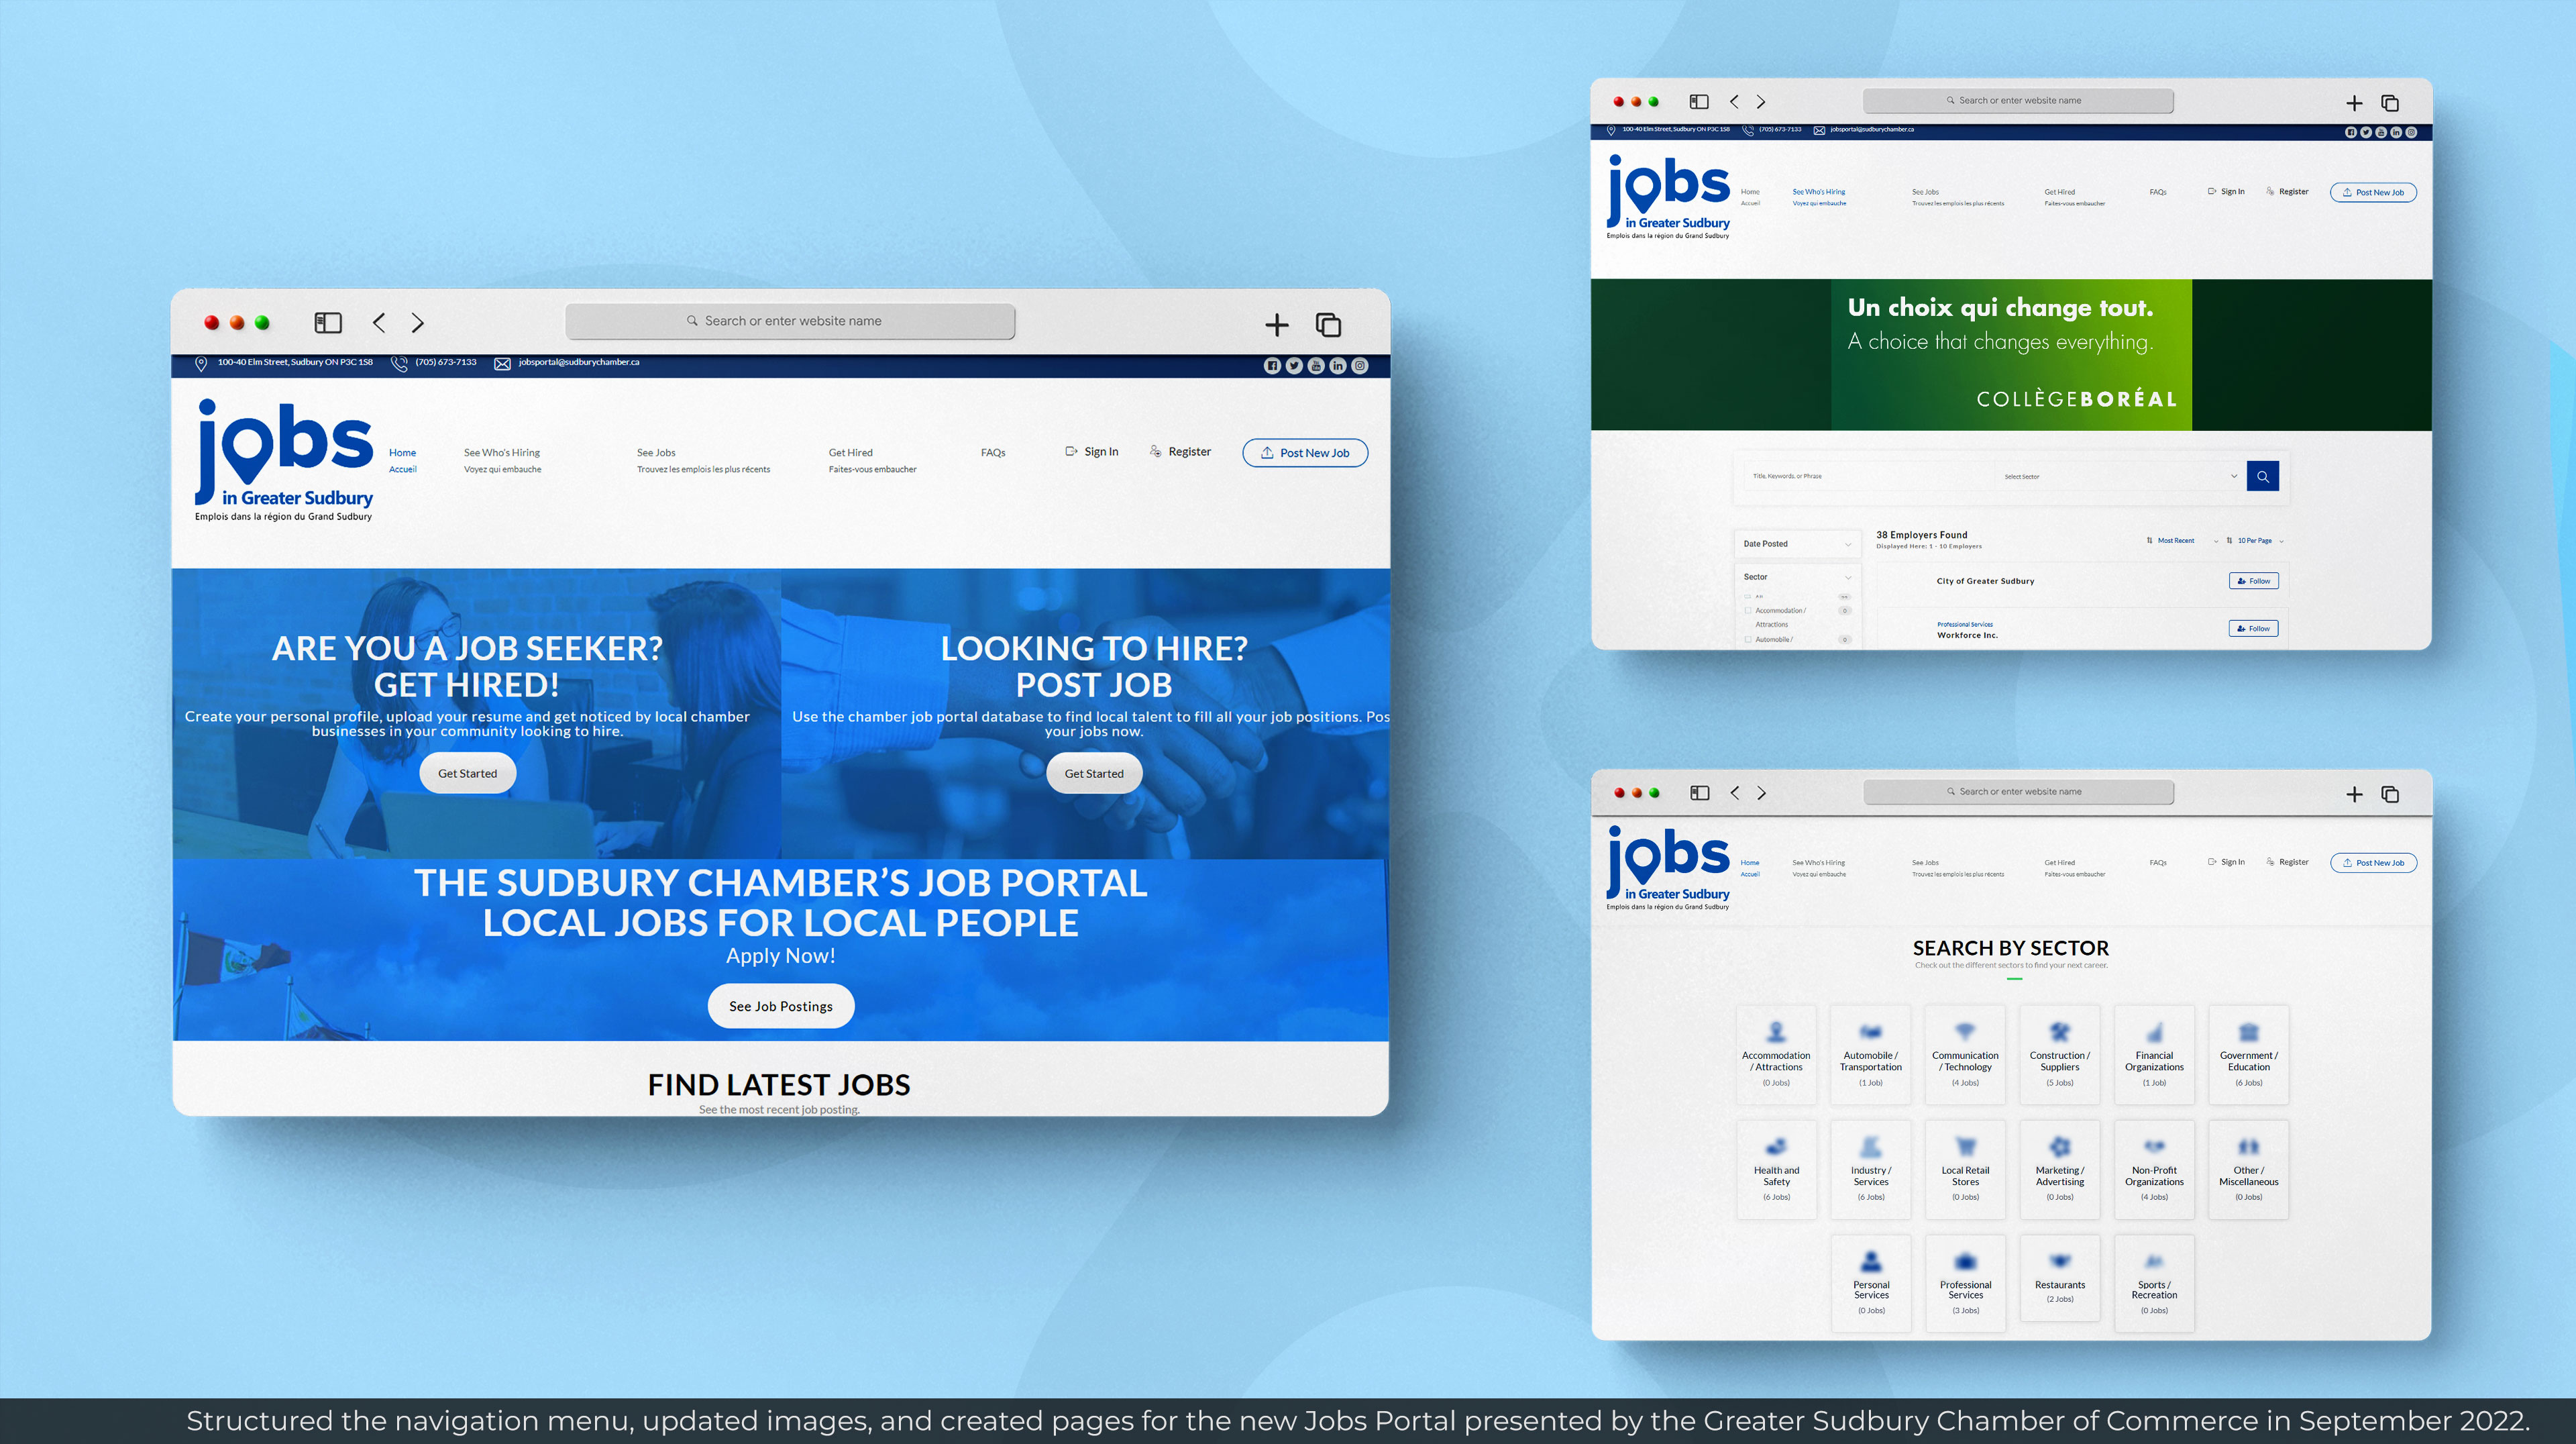 Jobs Portal by the Greater Sudbury Chamber of Commerce.